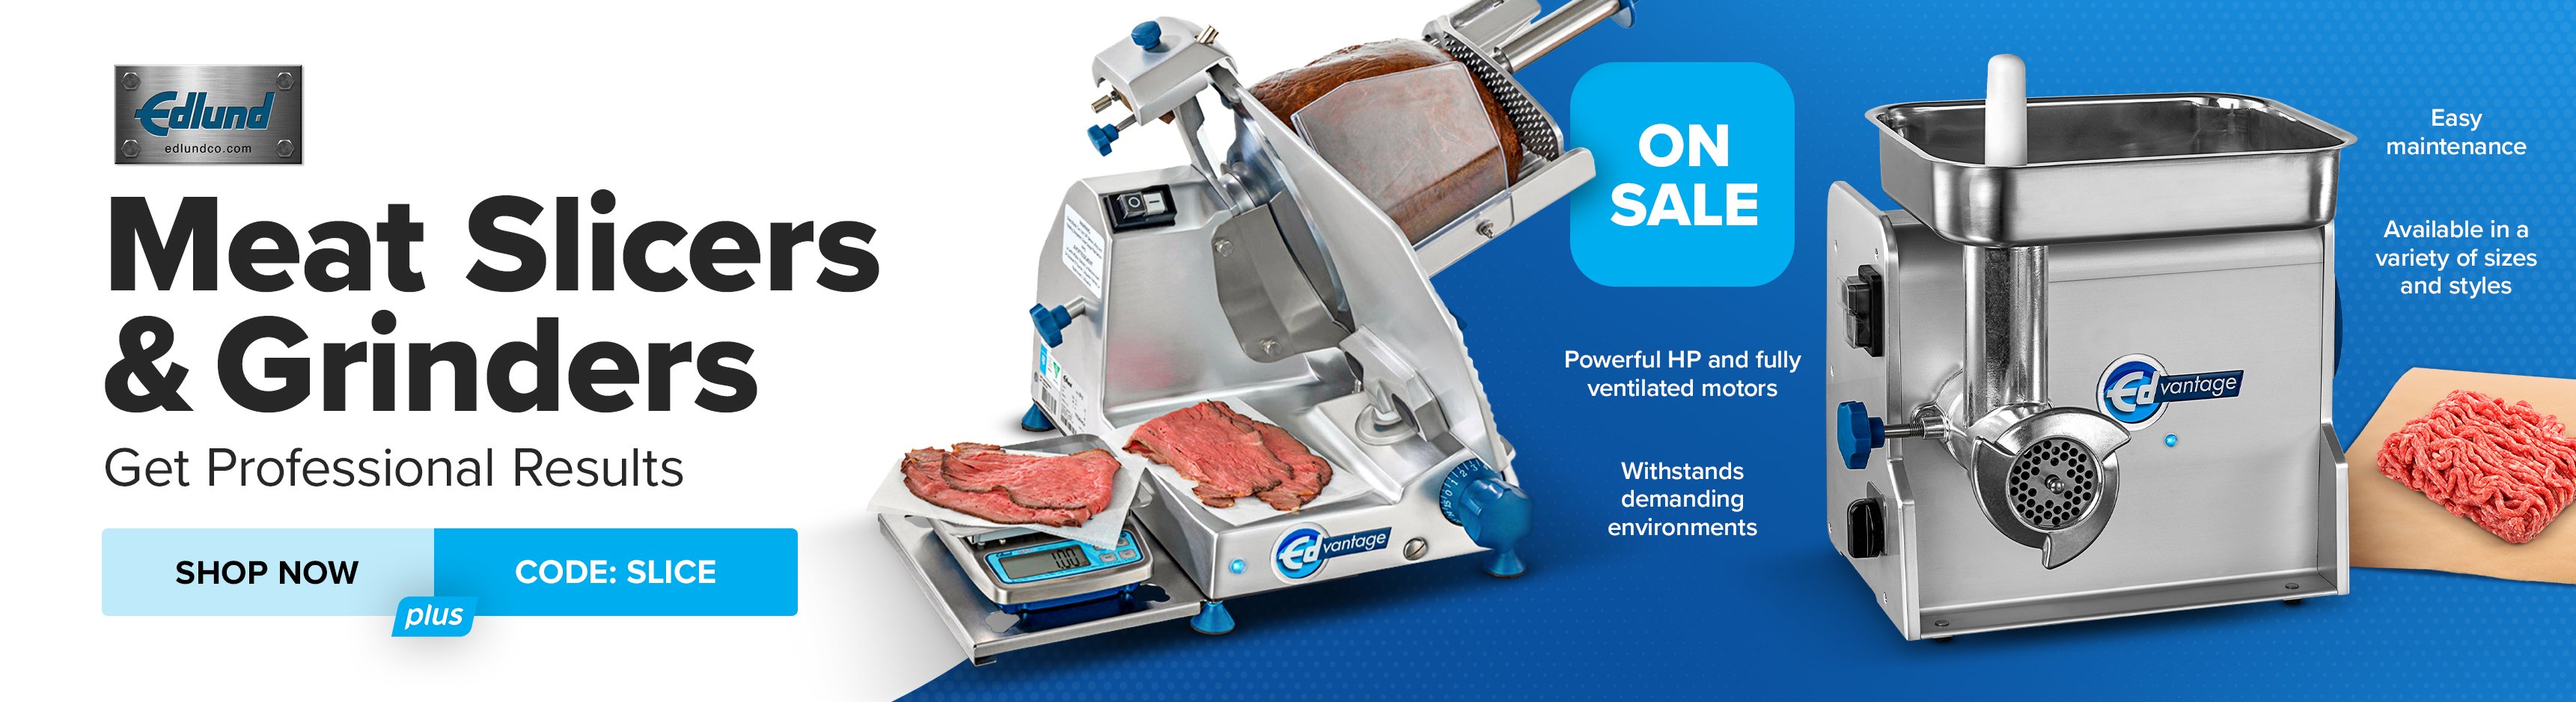 Get Professional Results with Edlund Meat Slicers & Grinders On Sale Shop Now Use Code SLICE